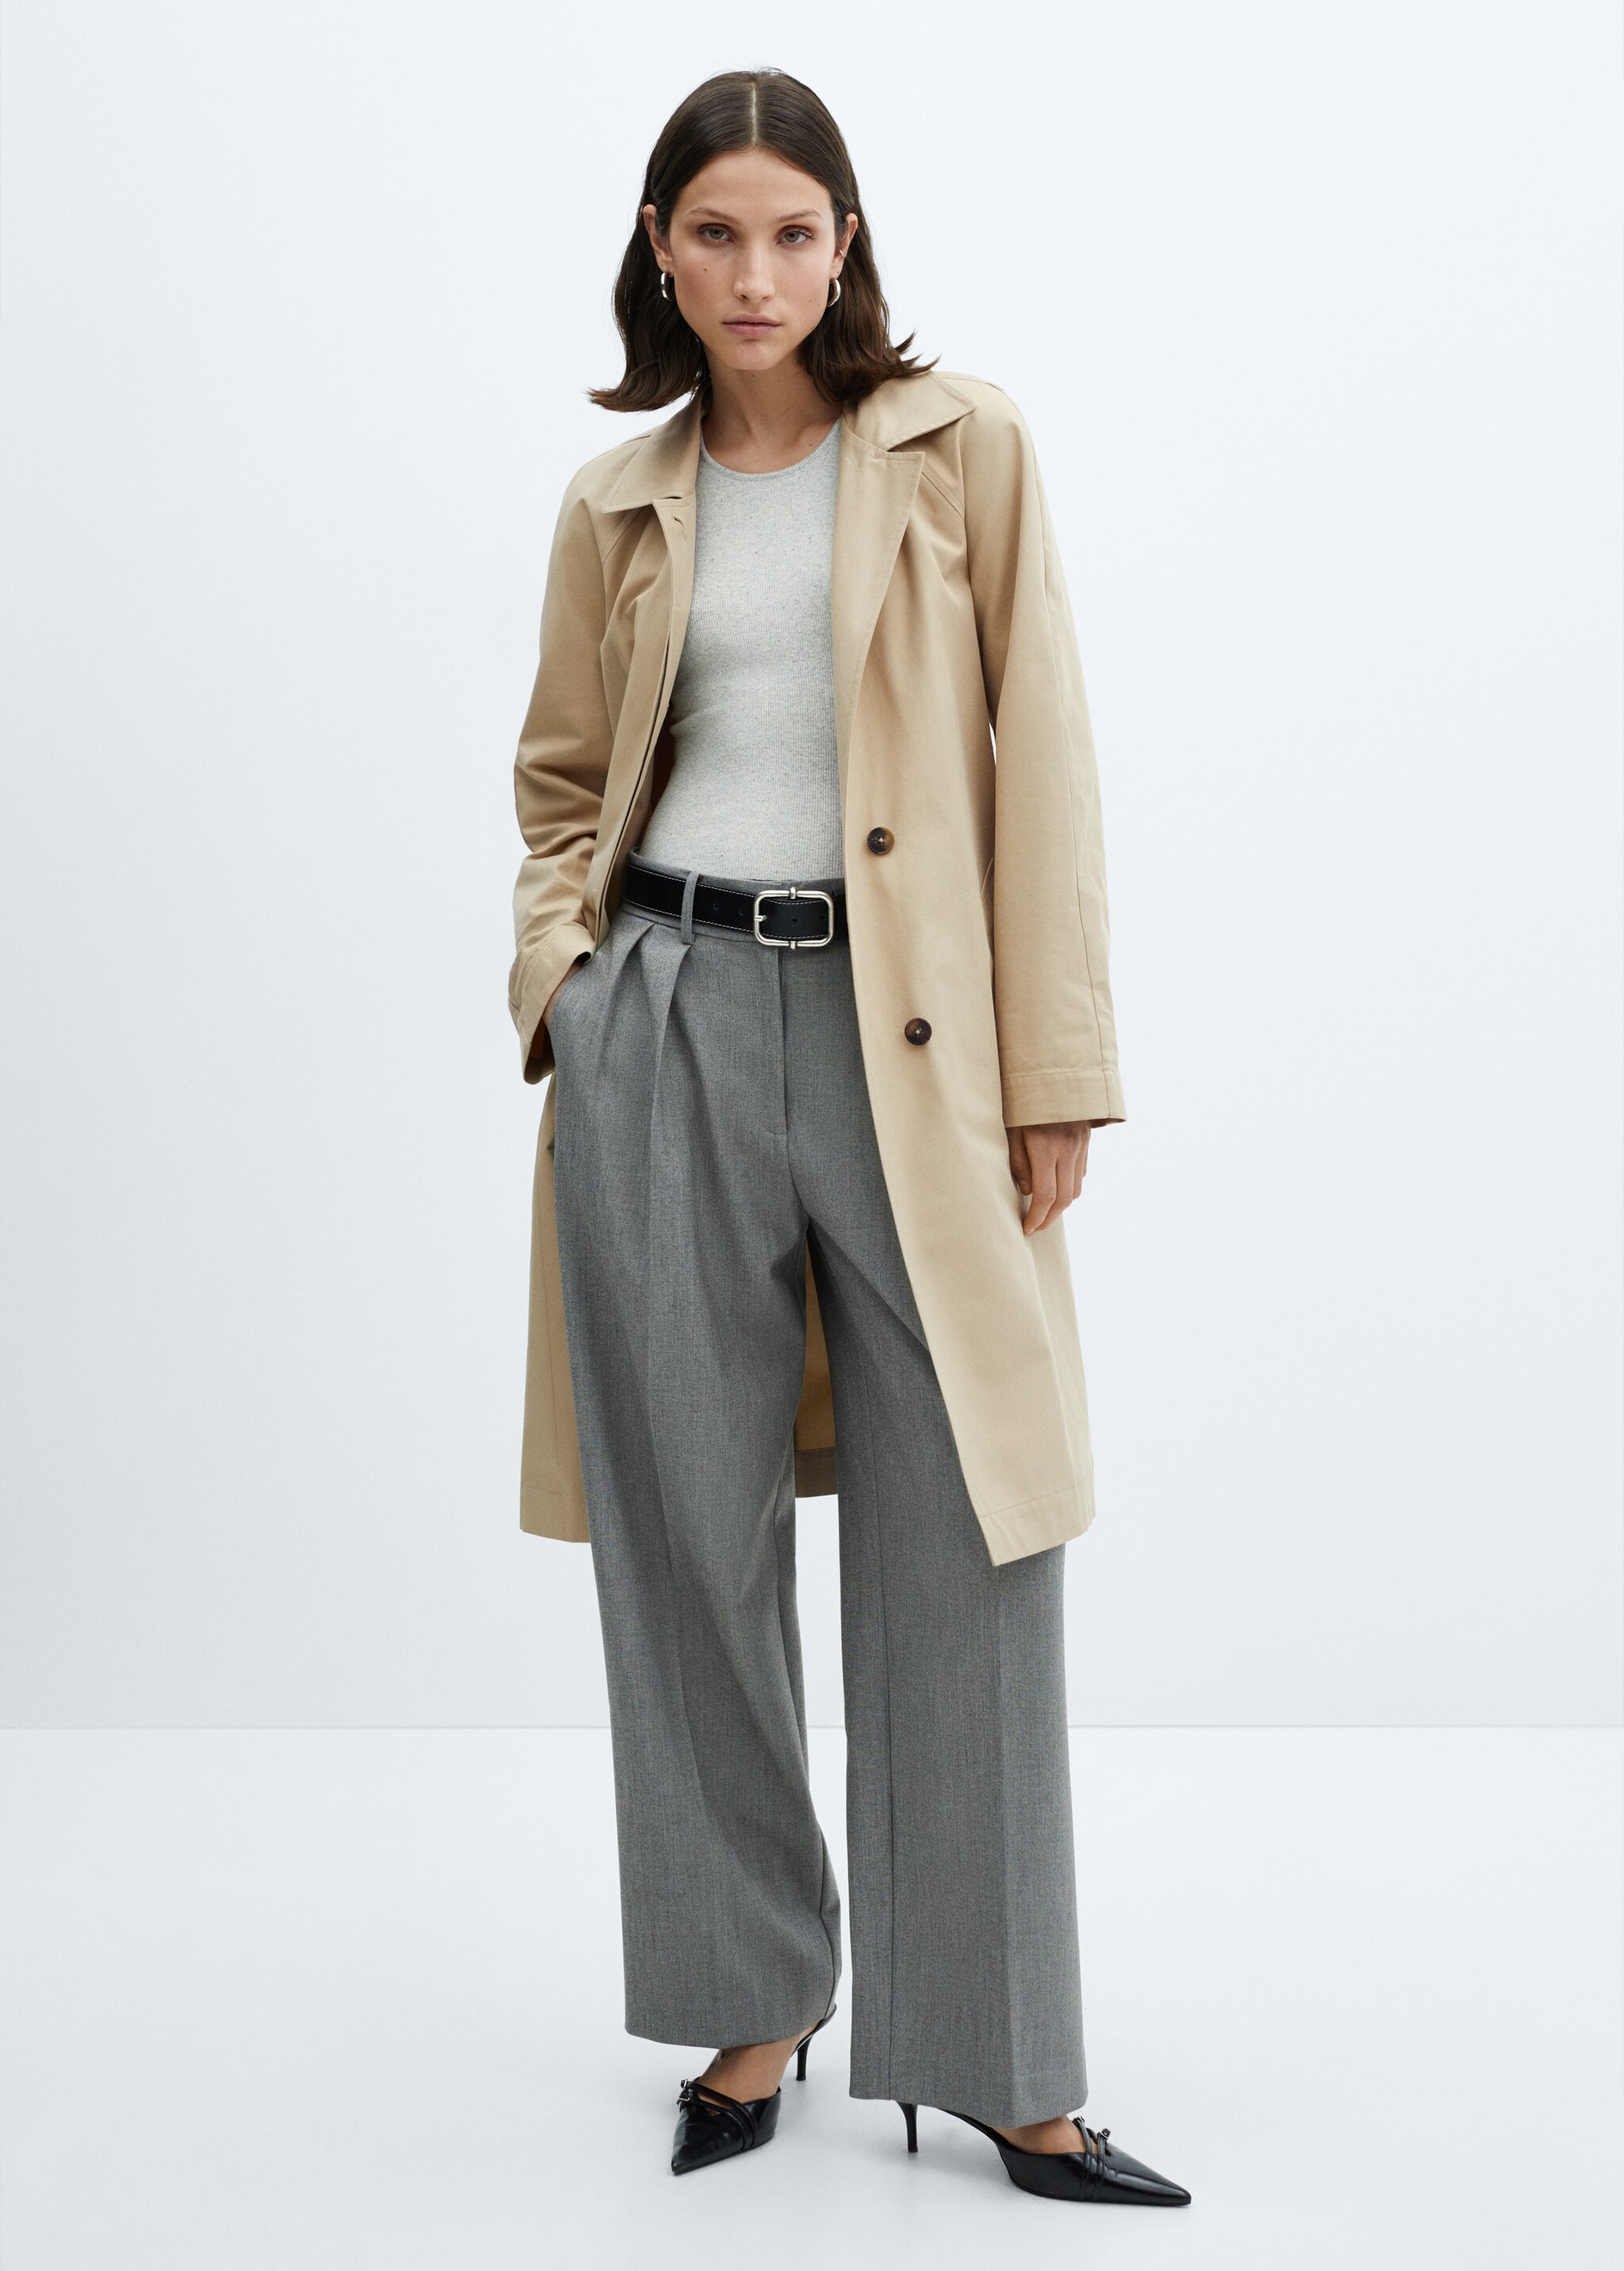 Cotton trench coat with belt - General plane